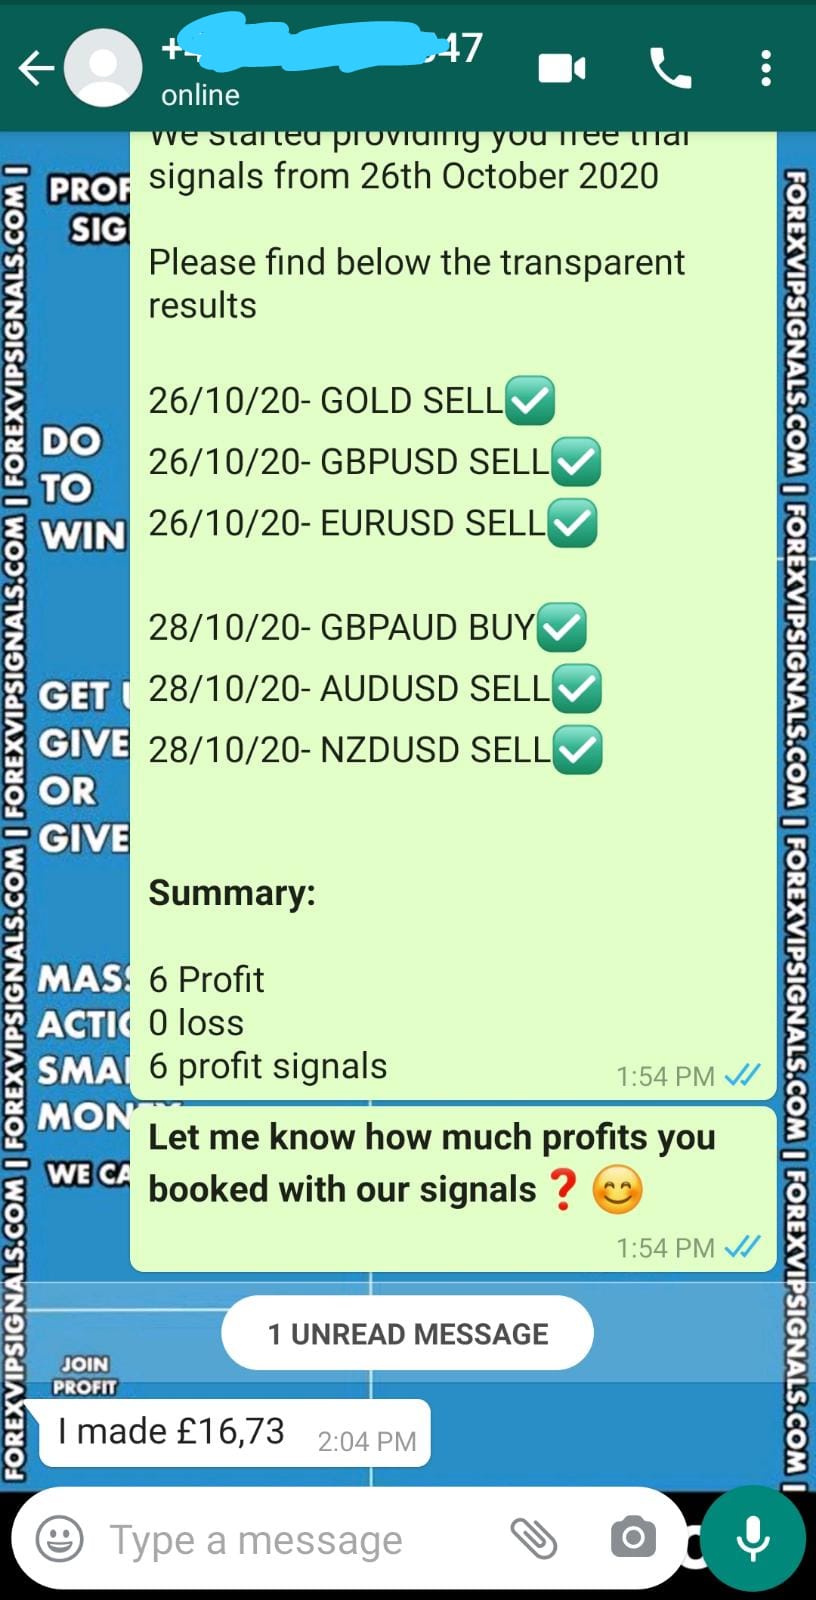 fx signals with forex vip signals